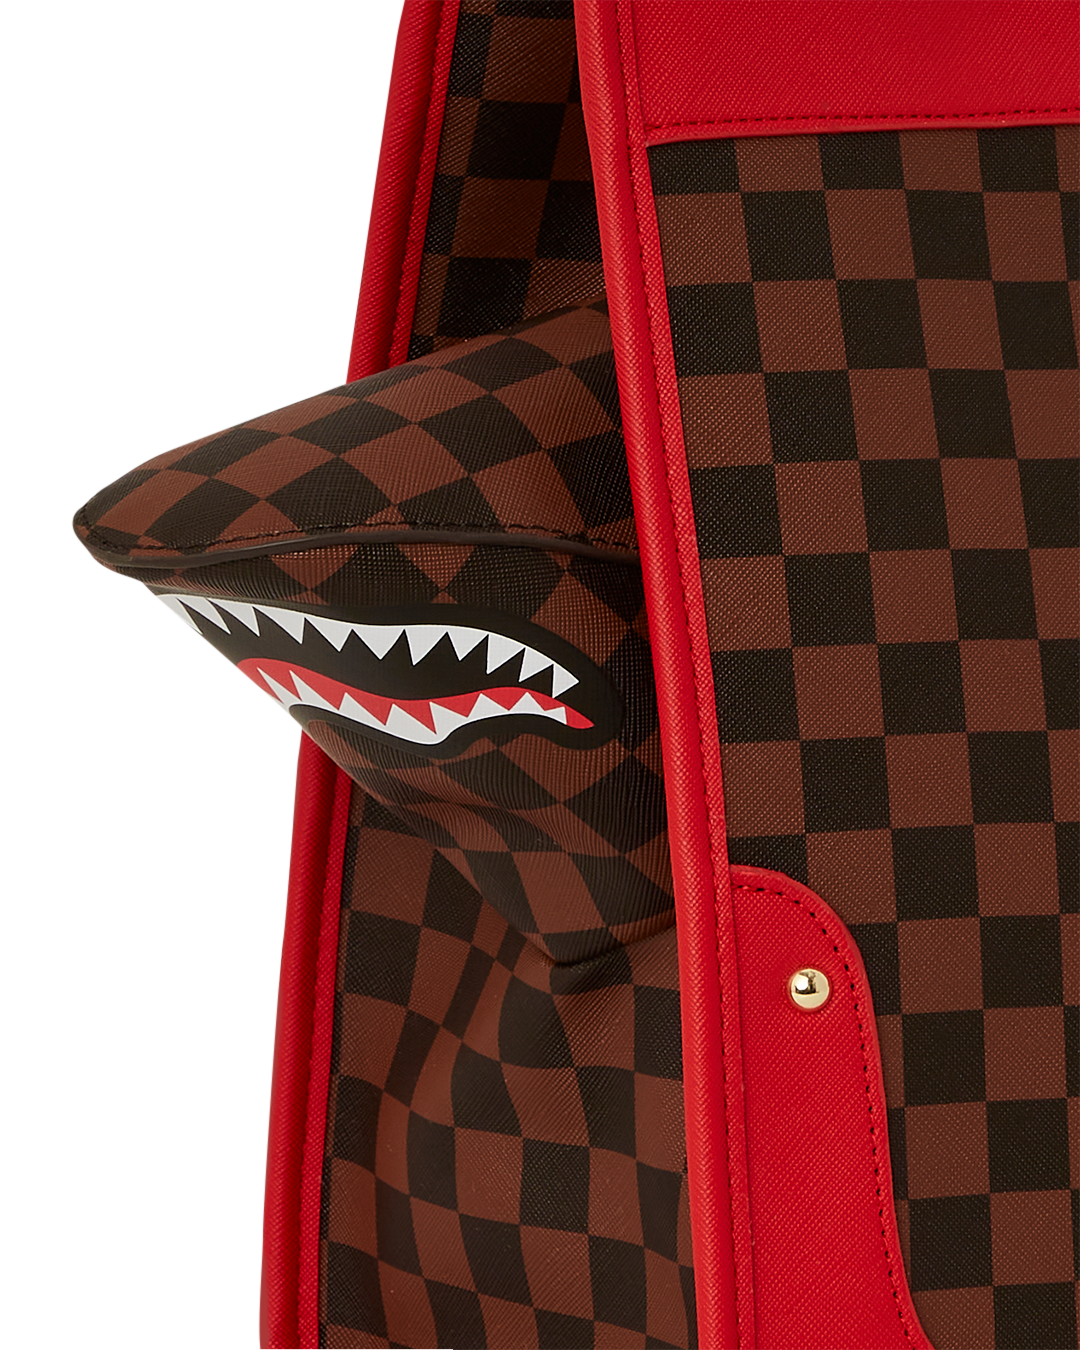 SPRAYGROUND® TOTE ALL OR NOTHING SHARKS IN PARIS TOTE